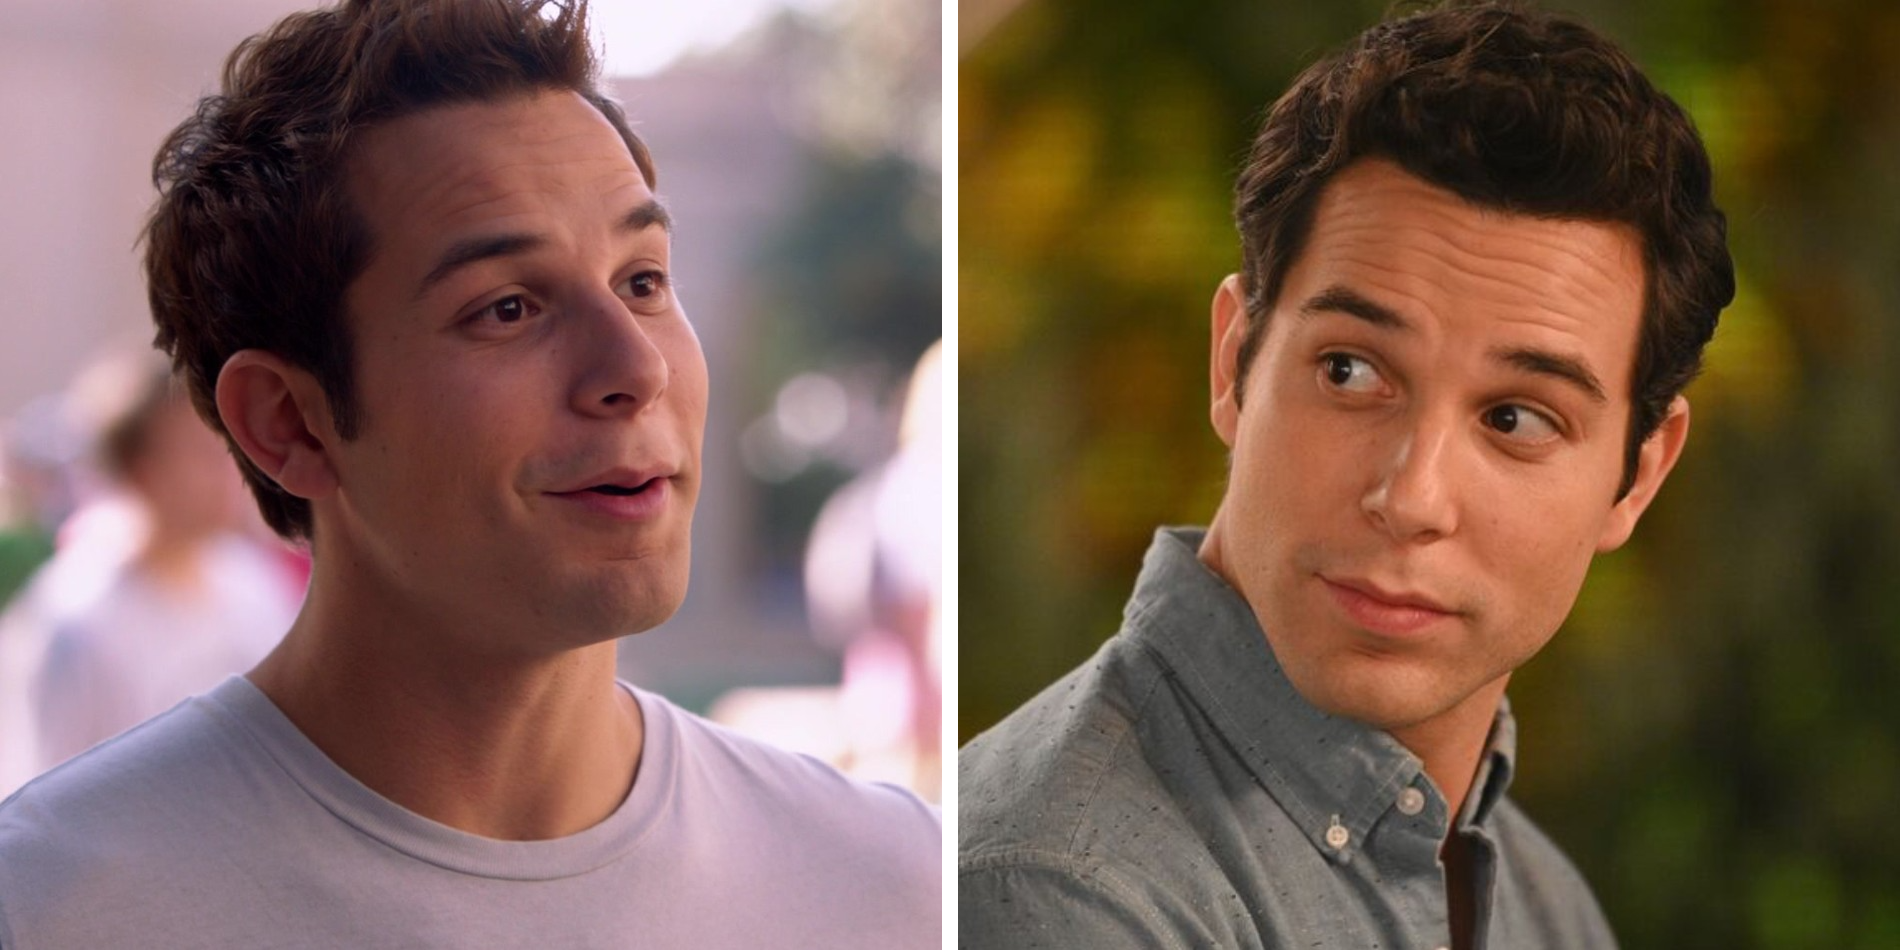 Skylar Astin in Pitch Perfect and Zoey's Extraordinary Playlist